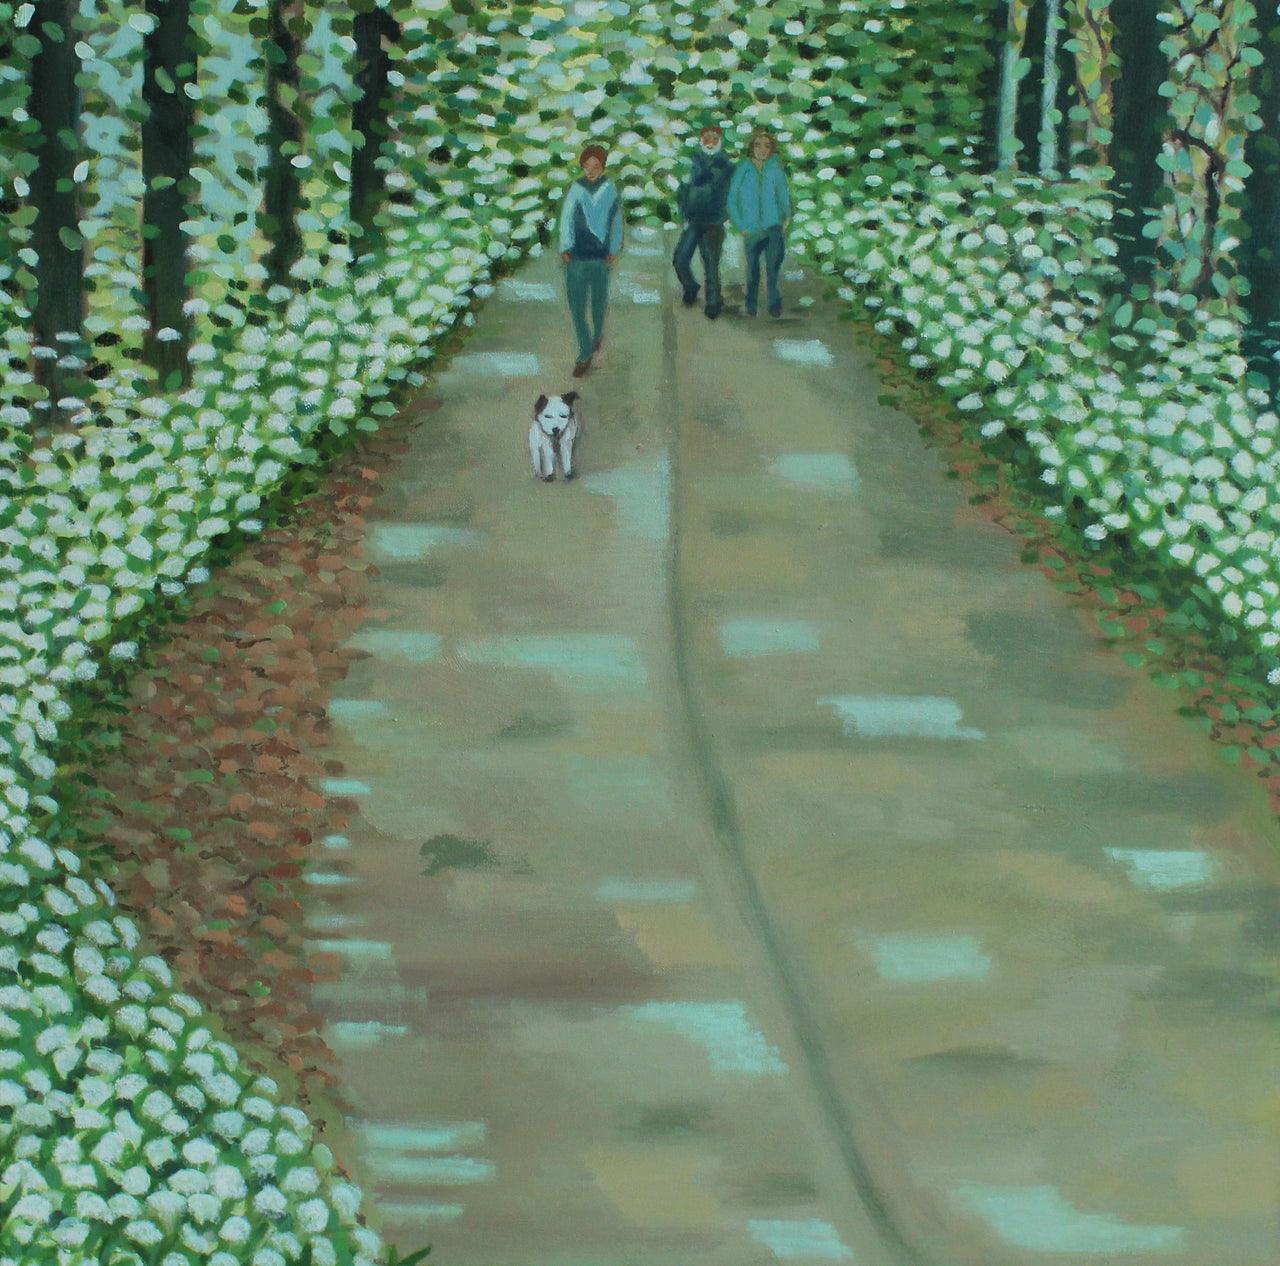 Three figures and a dog walking on a path through a wooded area with lots of white Chervil to the sides by Cornish artist Siobhan Purdy